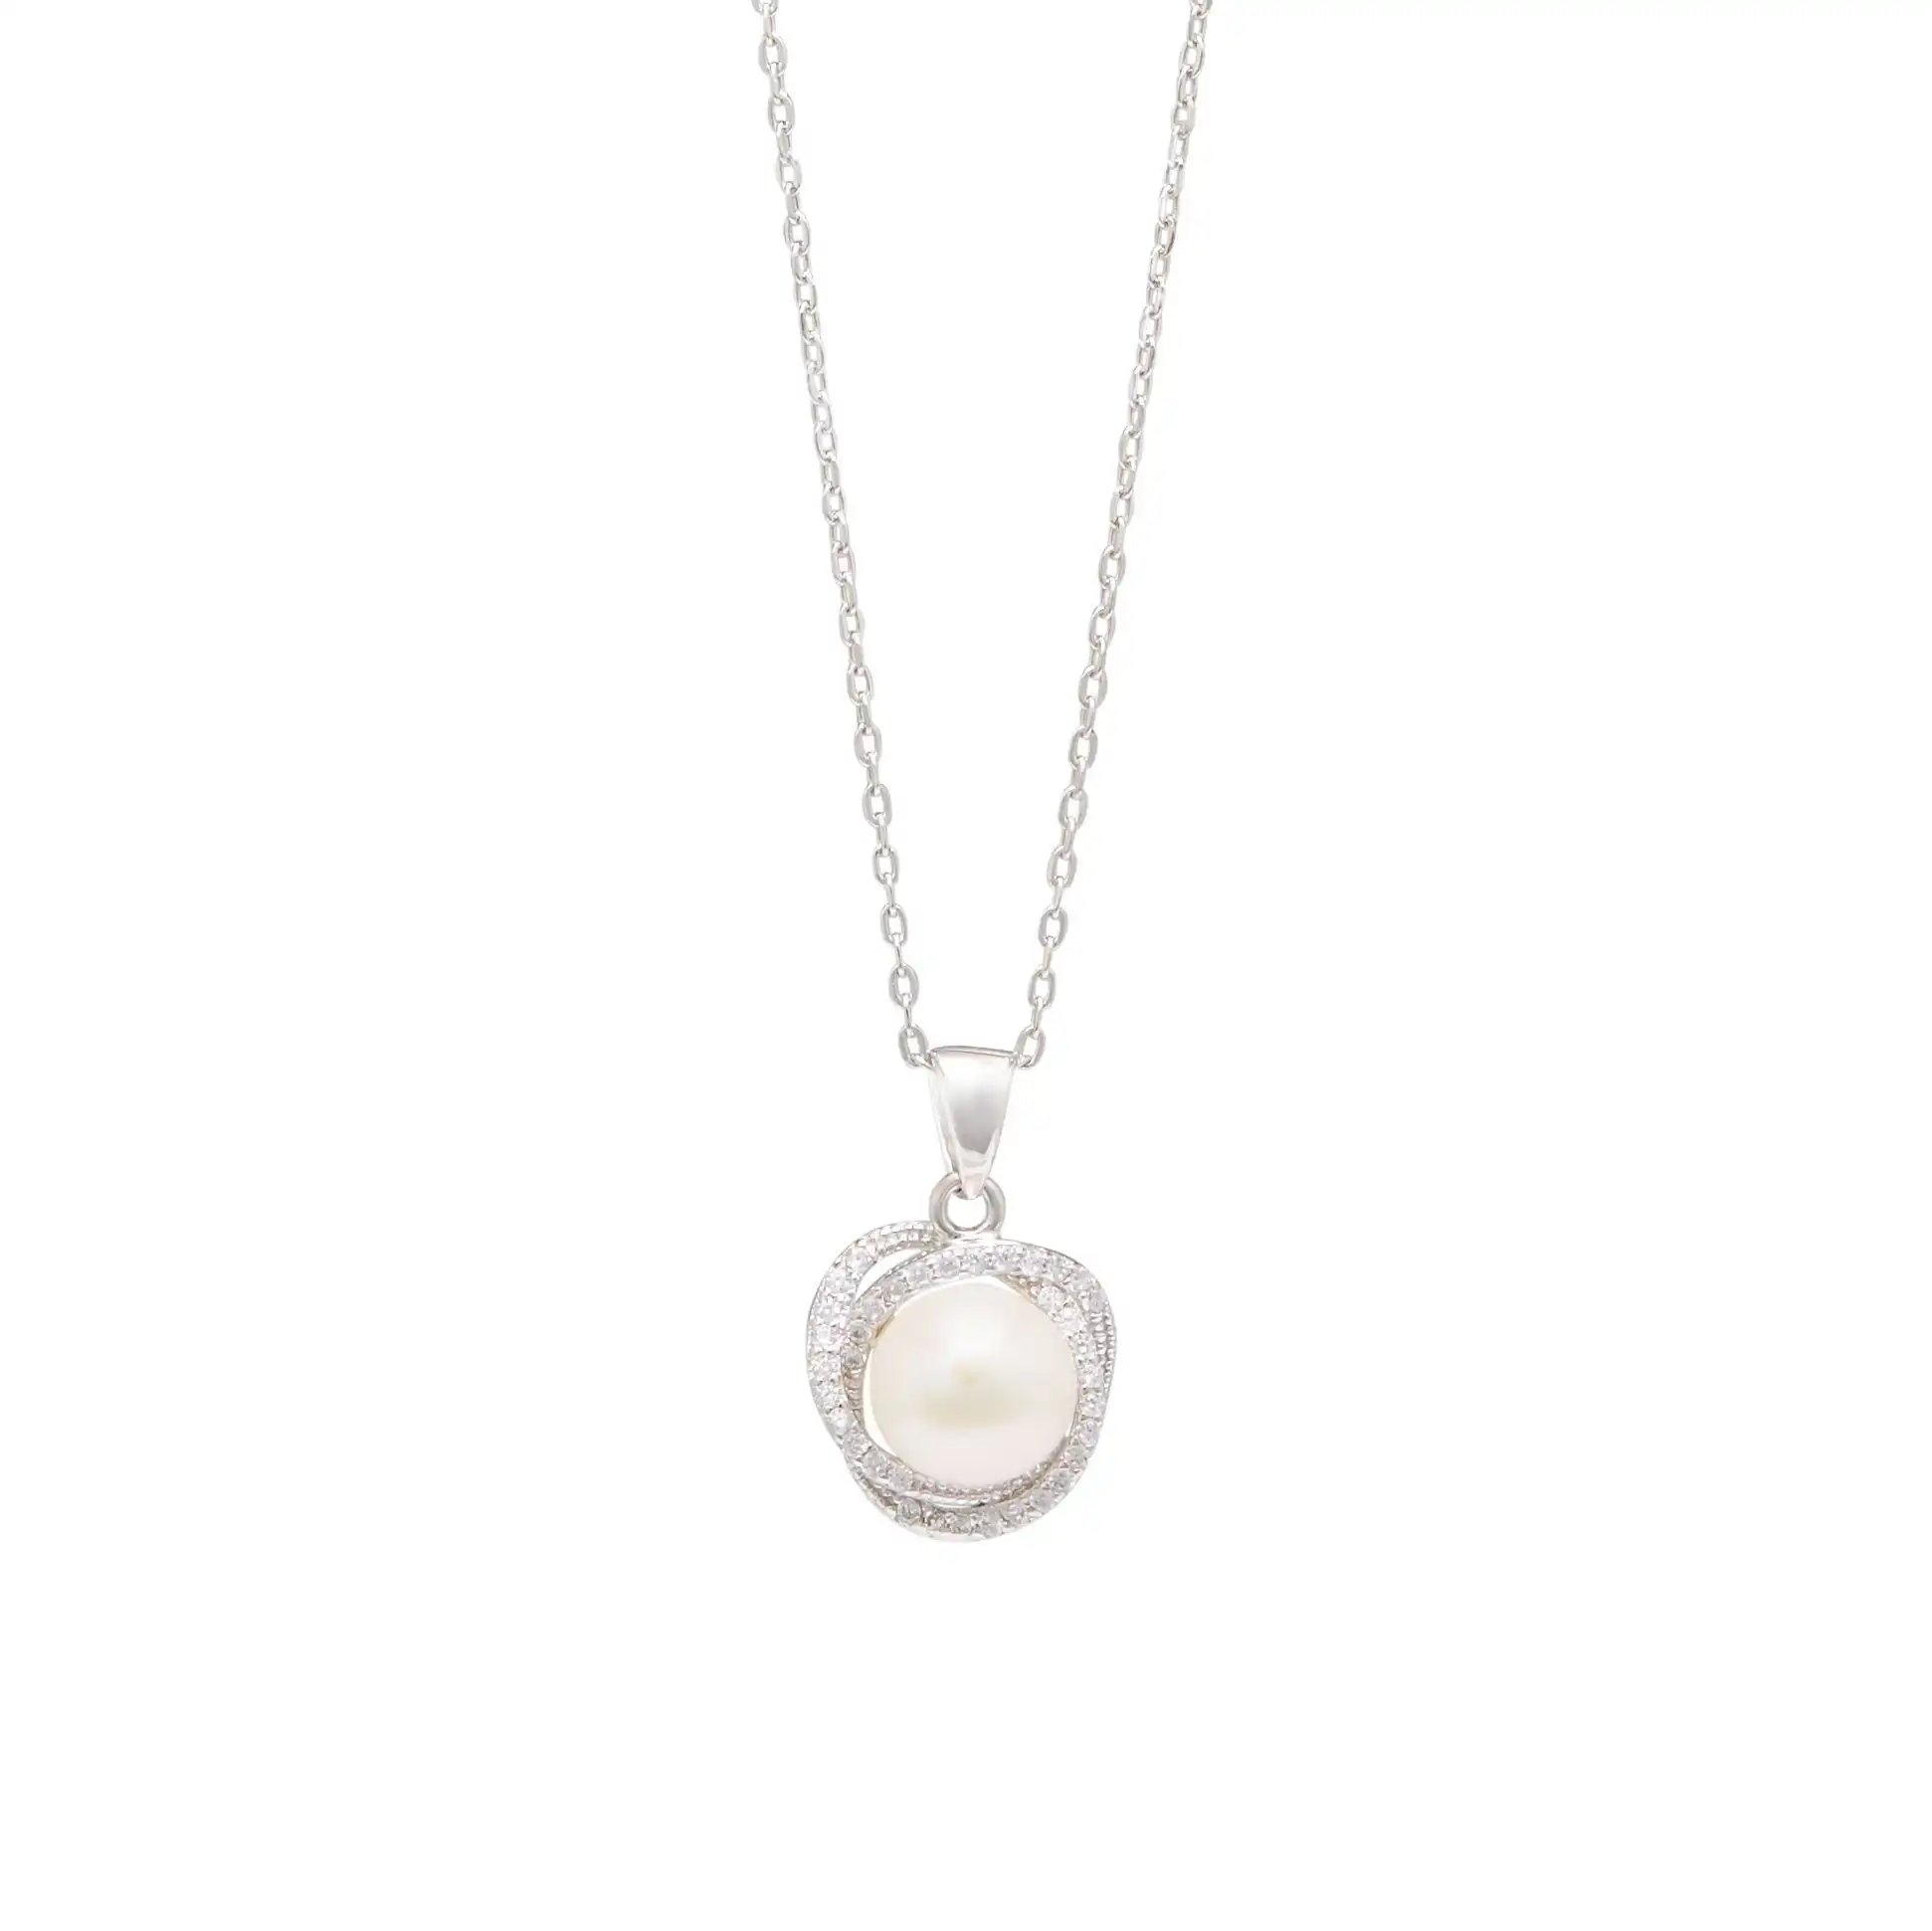 45cm Freshwater Pearl & Cubic Zirconia Halo Swirl Necklace in Sterling Silver